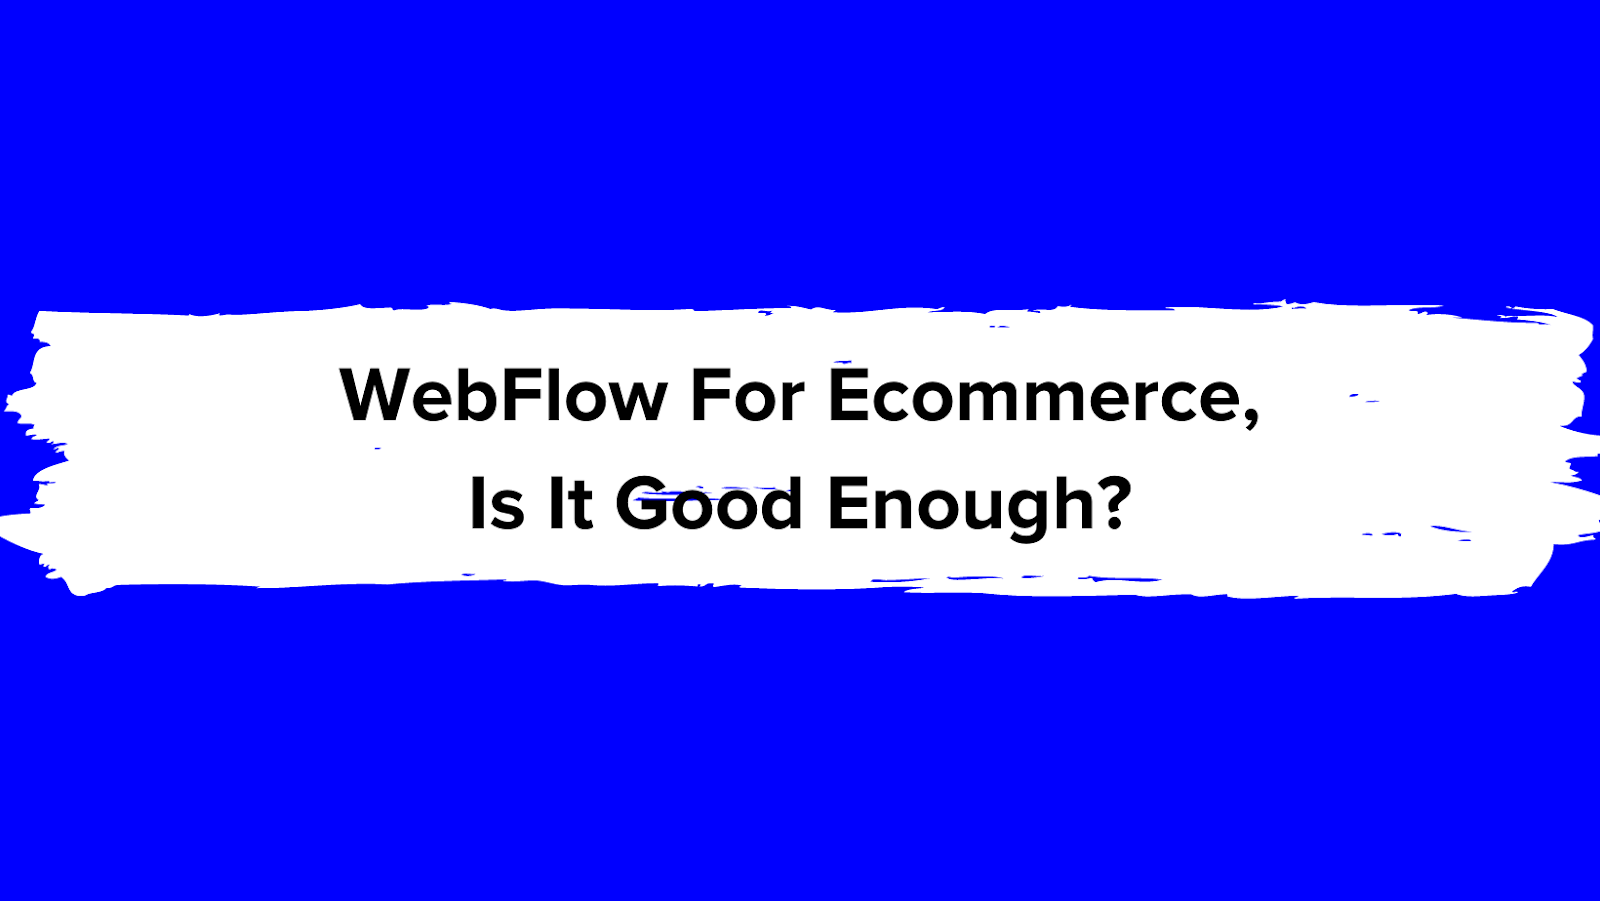 WebFlow For Ecommerce, Is It Good Enough?